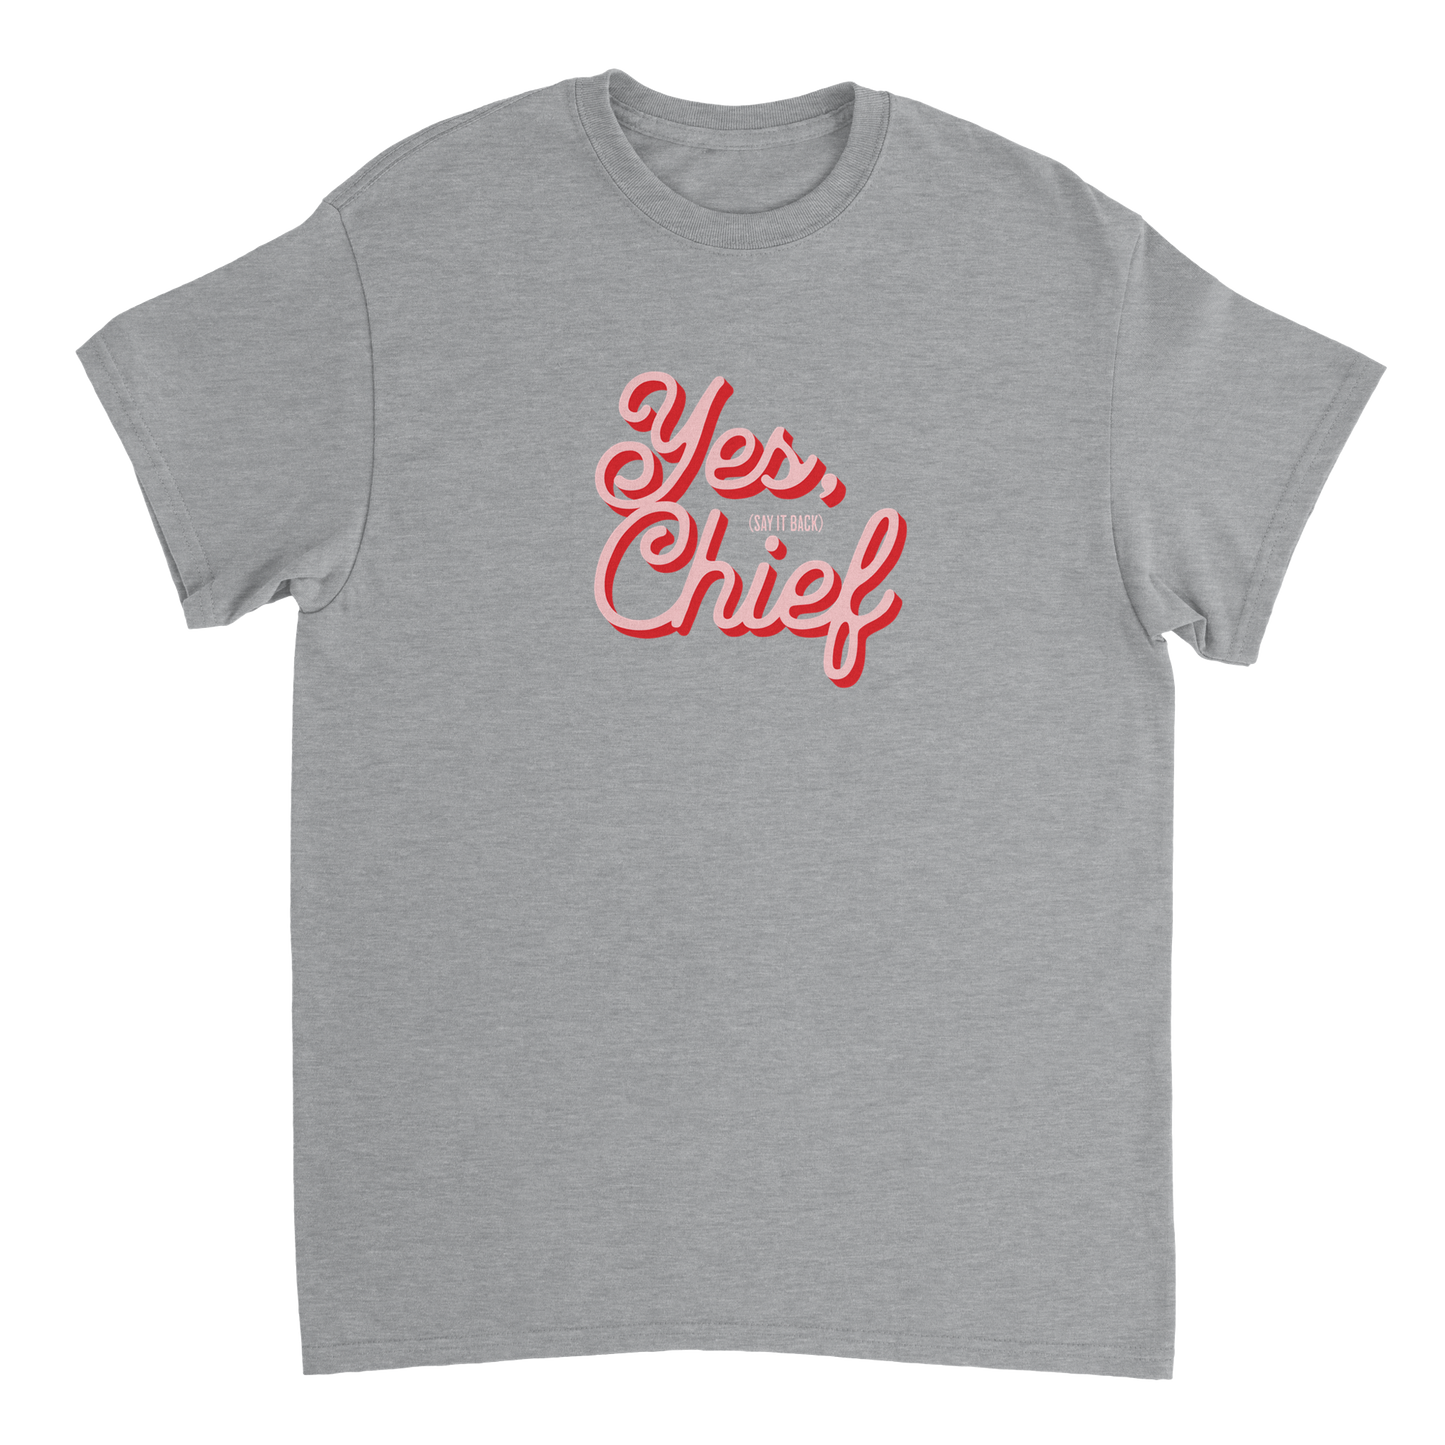 Yes chief and say it back Heavyweight Unisex Crewneck T-shirt